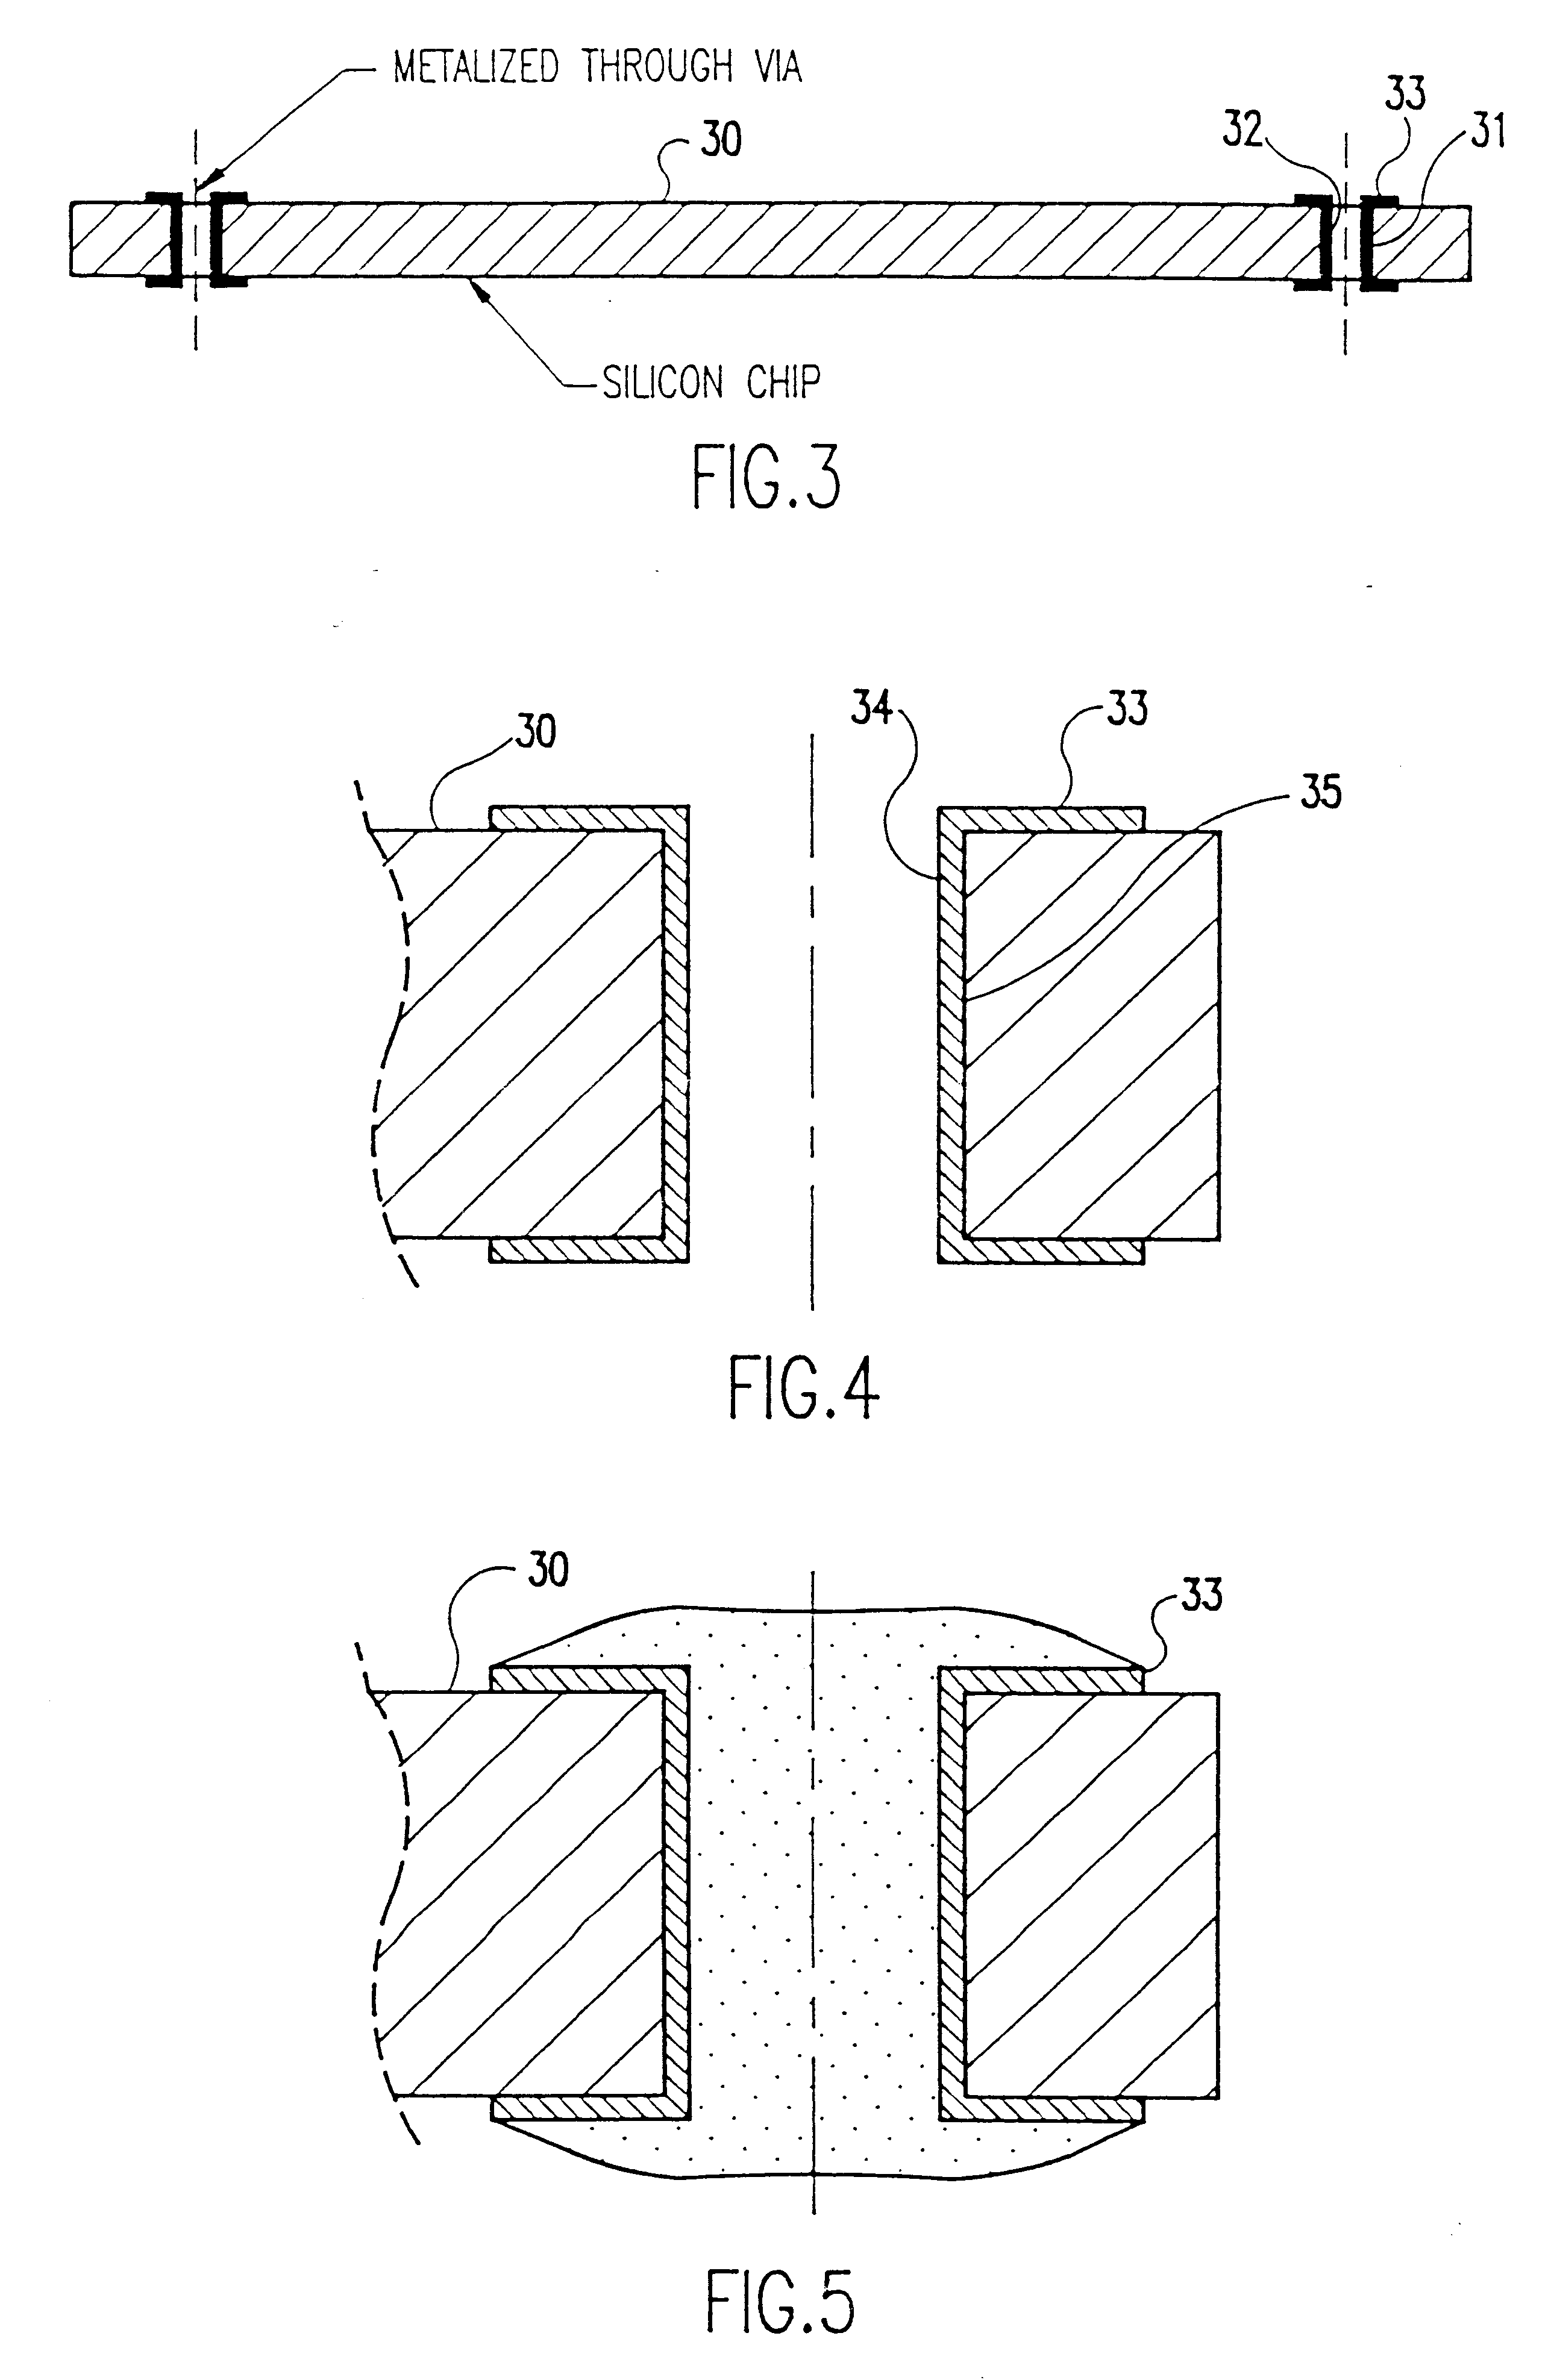 High density integrated circuit packaging with chip stacking and via interconnections